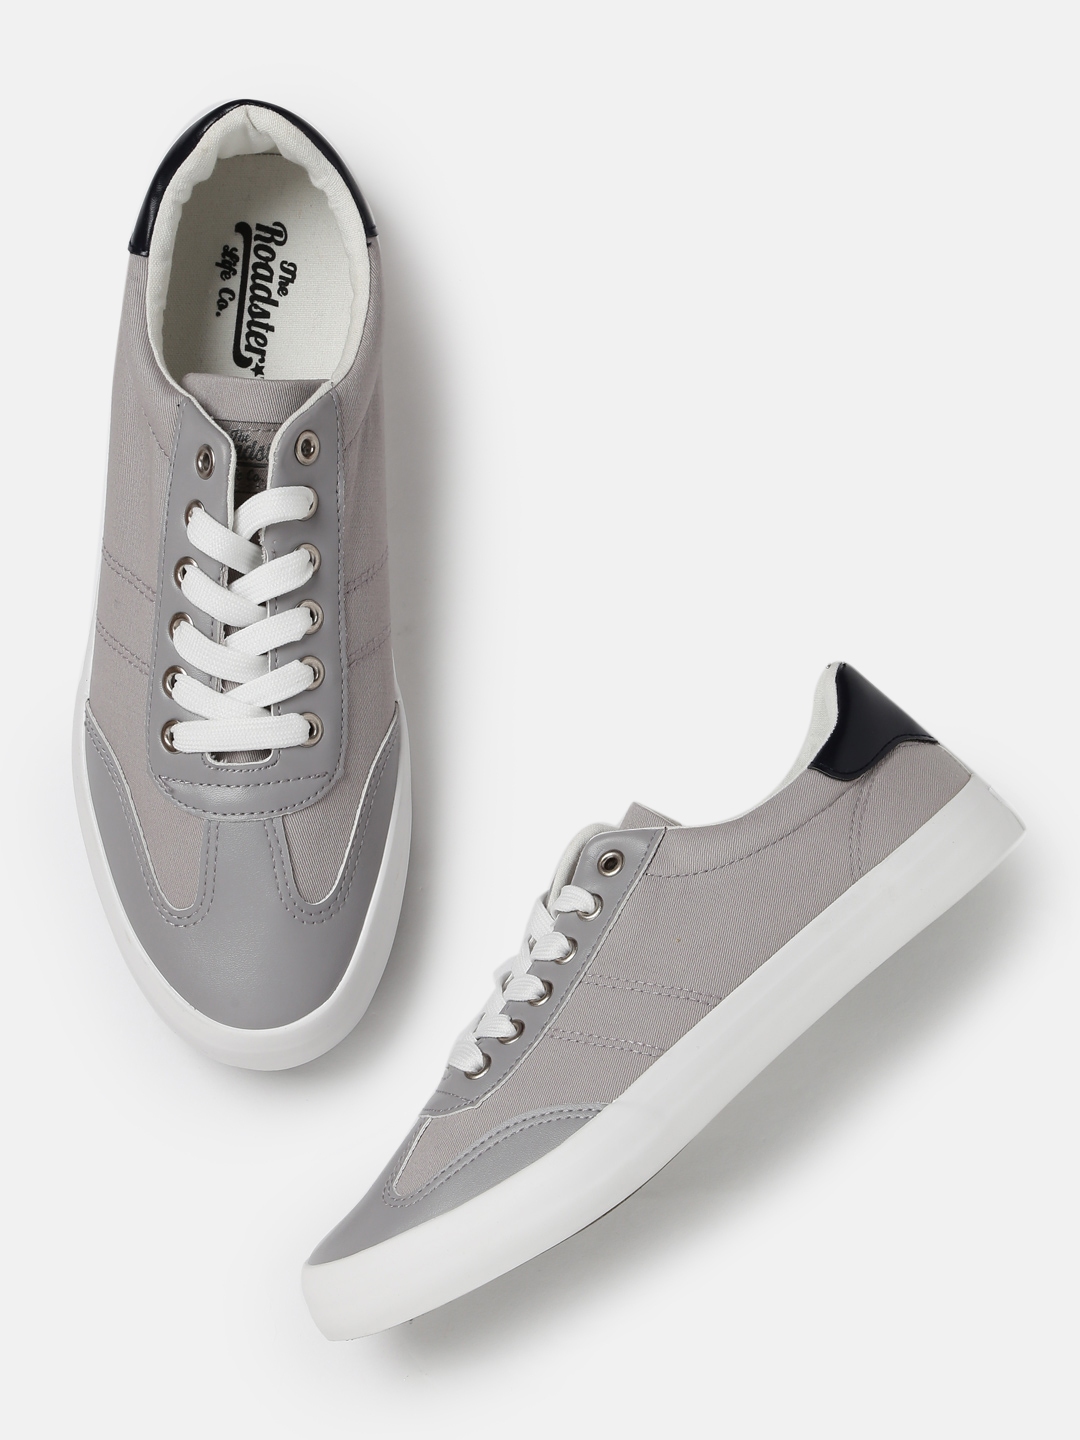 roadster sneakers shoes